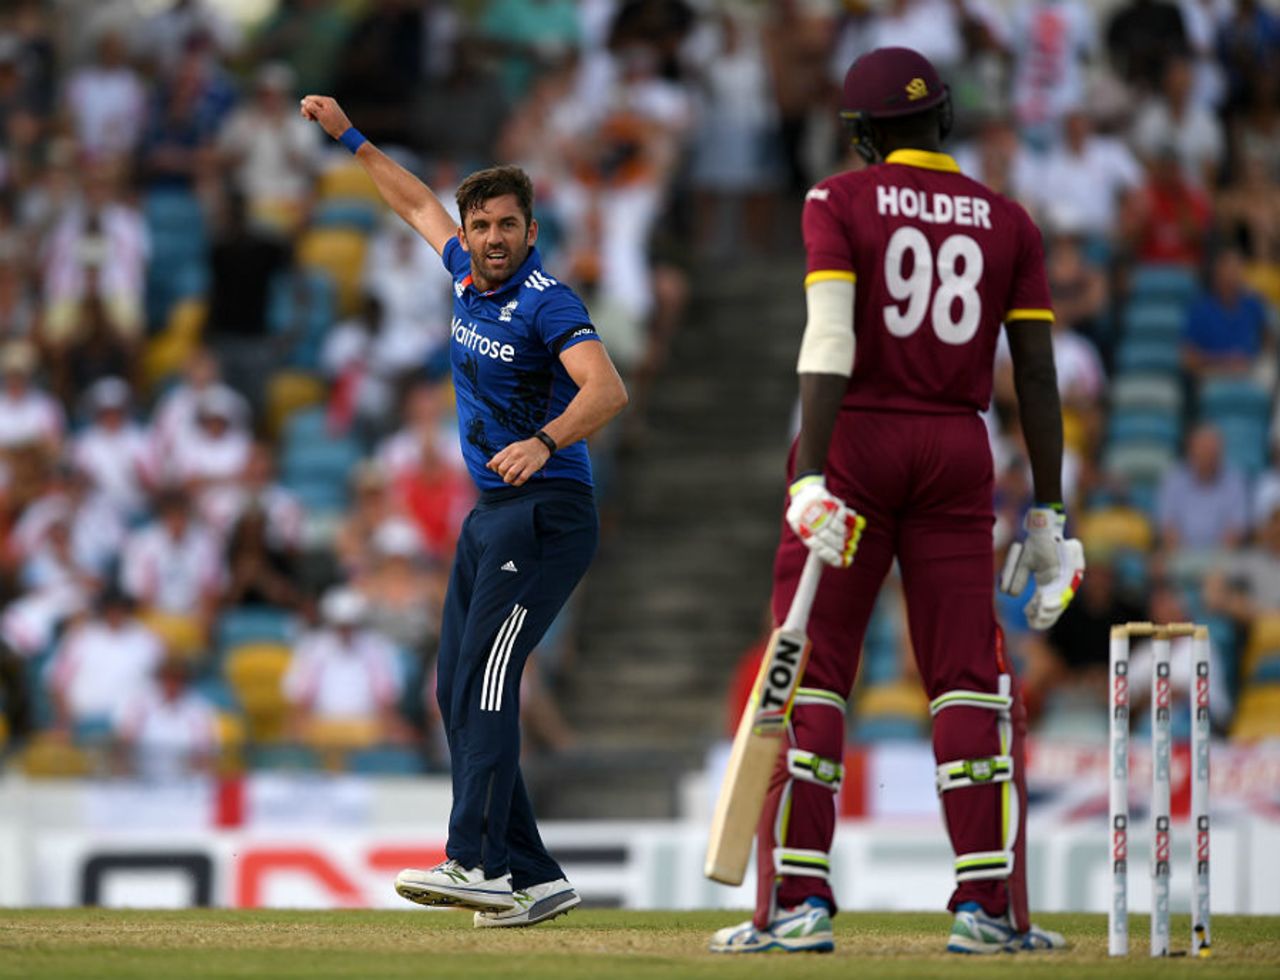 Liam Plunkett had Jason Holder caught behind for a first-ball duck, West Indies v England, 3rd ODI, Barbados, March 9, 2017